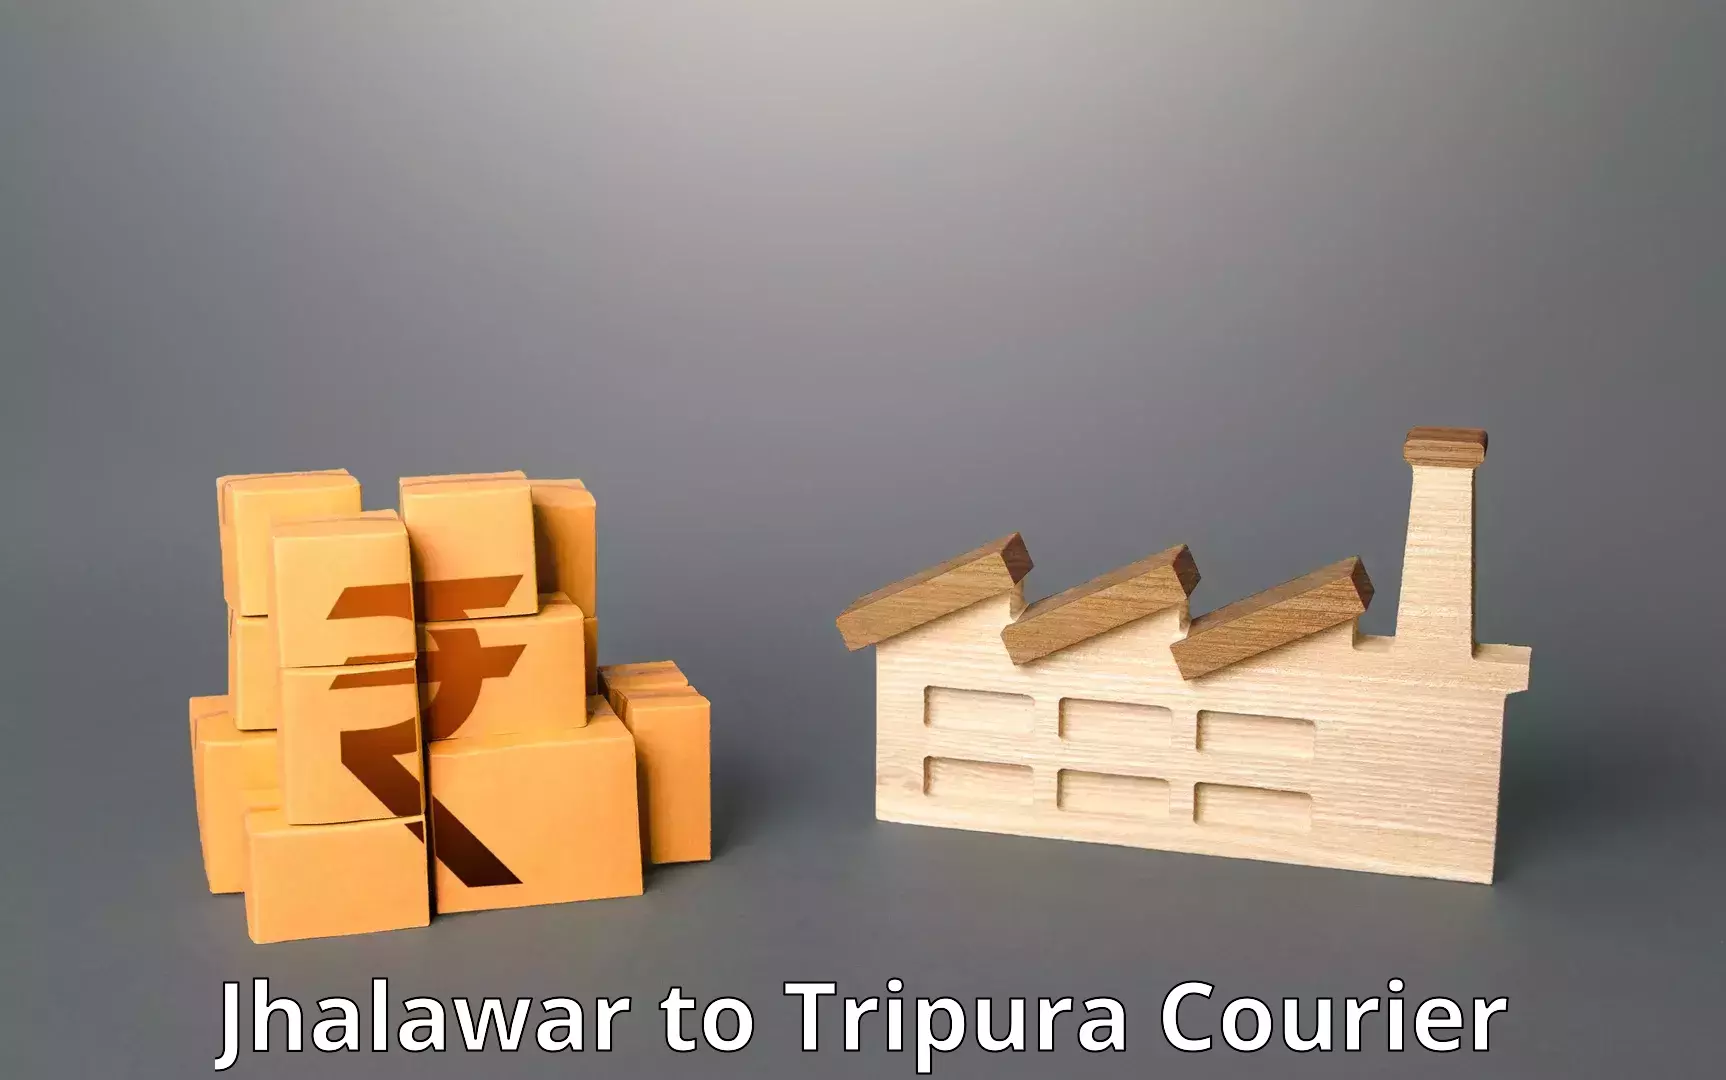 Dynamic courier operations Jhalawar to Udaipur Tripura